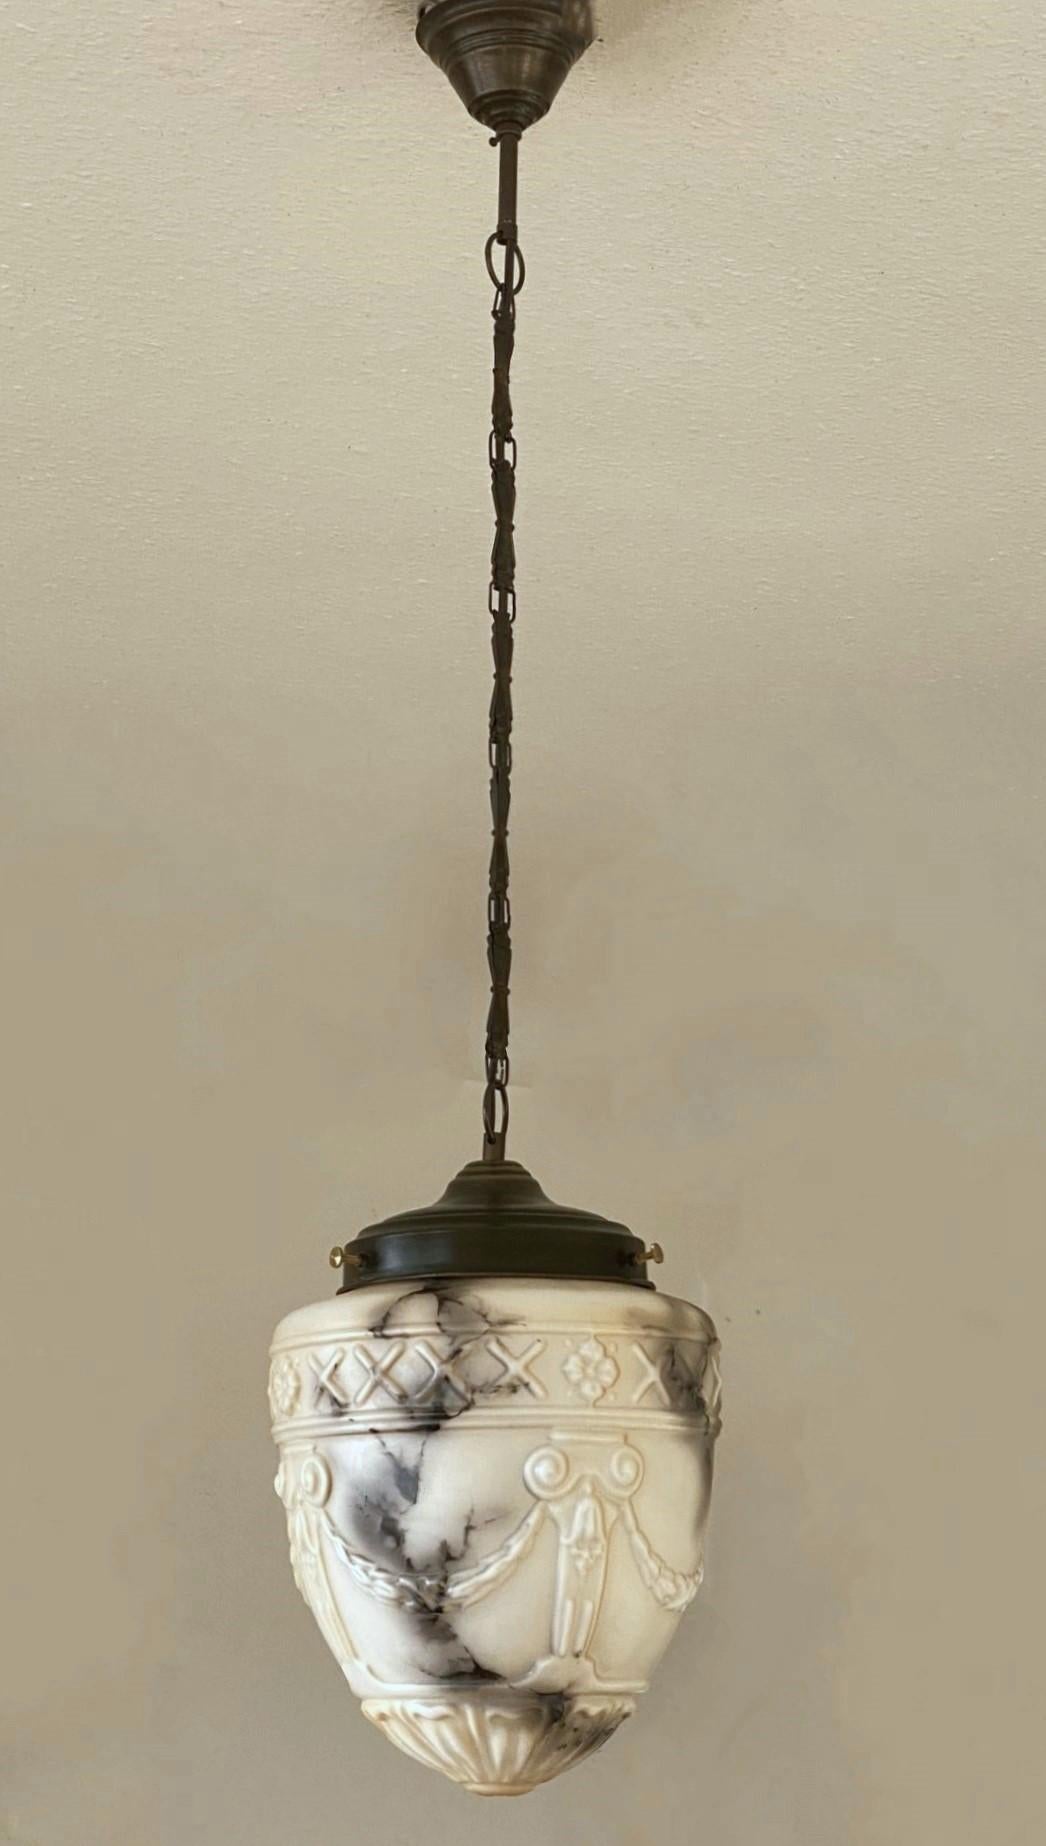 Patinated French Art Deco Alabaster Looking High-Releaf Glass Pendant Lantern, 1920-1930 For Sale